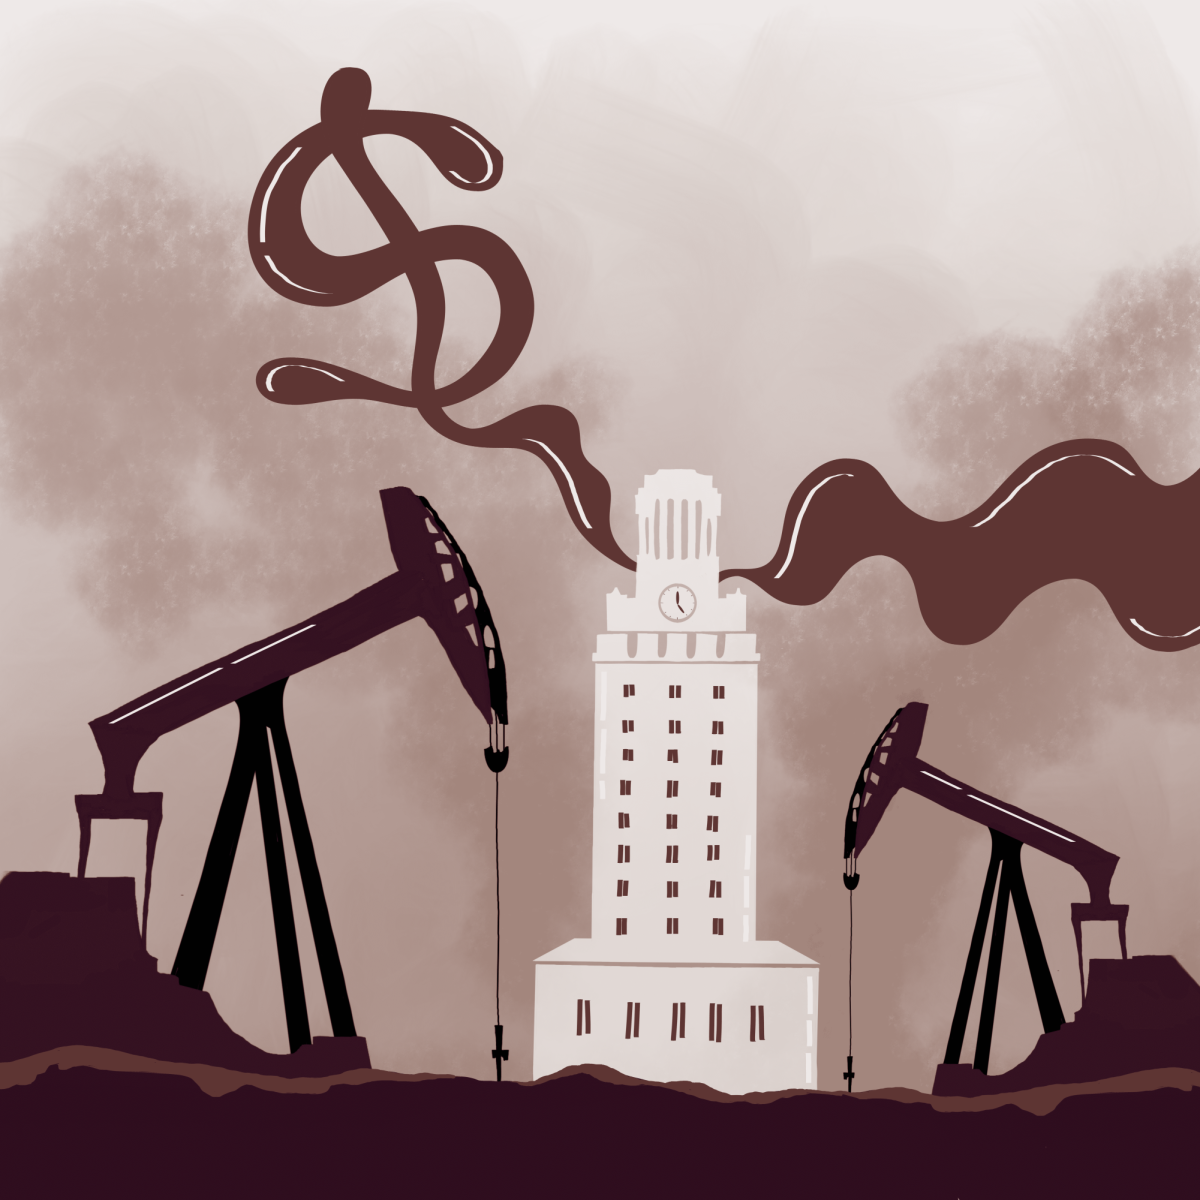 ‘The energy of the future’: The discourse surrounding state-endowed oil fields, investments